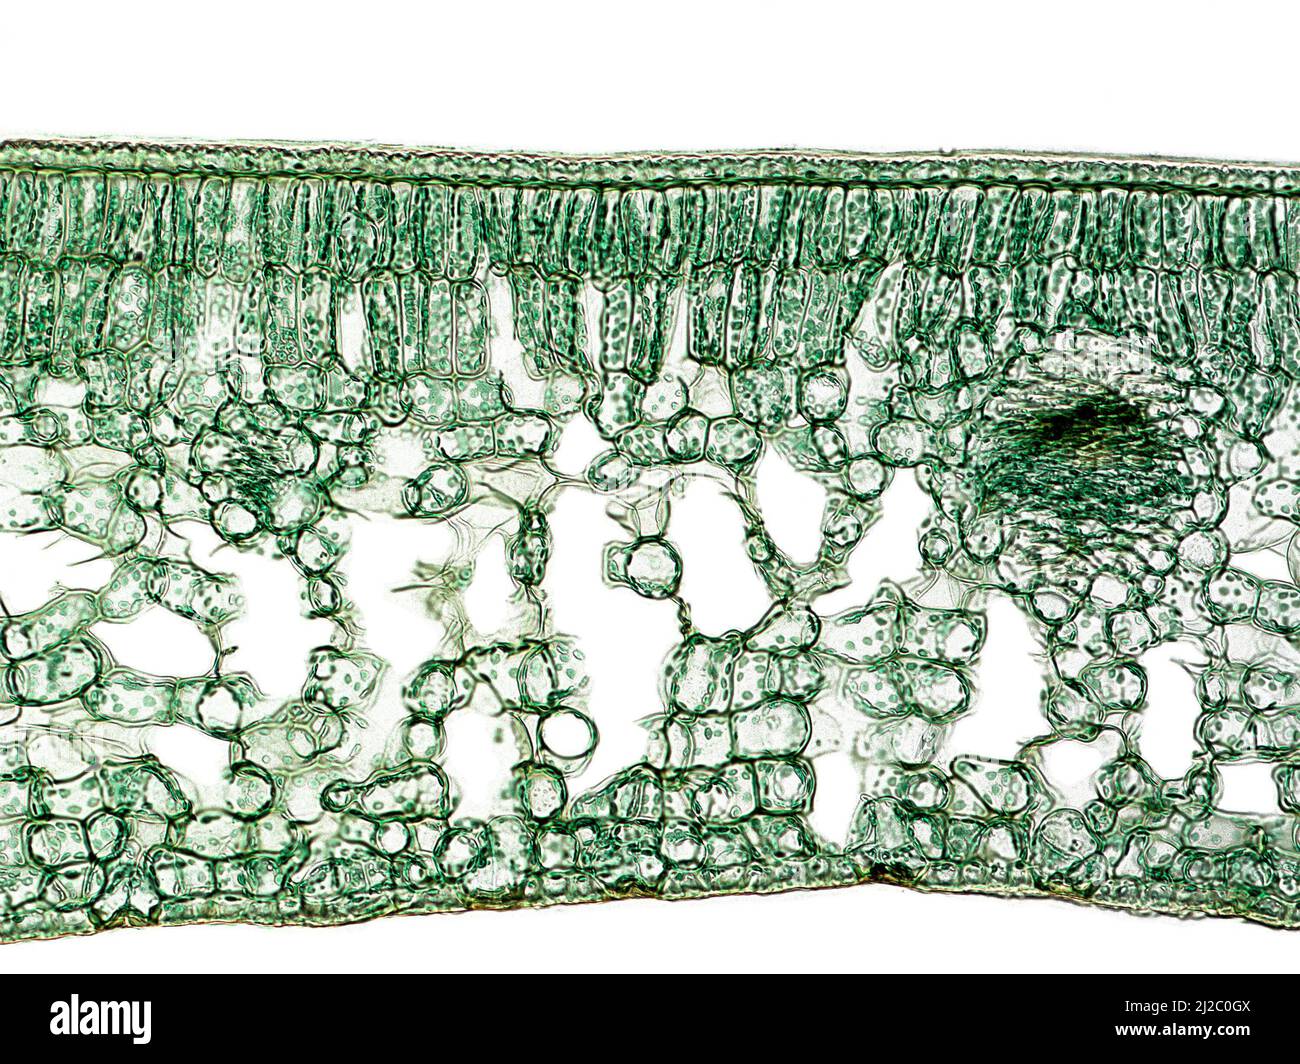 Cross section of a Camellia leaf, that show their general internal structure (cuticle, palisade parenchyma, spongy parenchyma, vascular bundles). Stock Photo